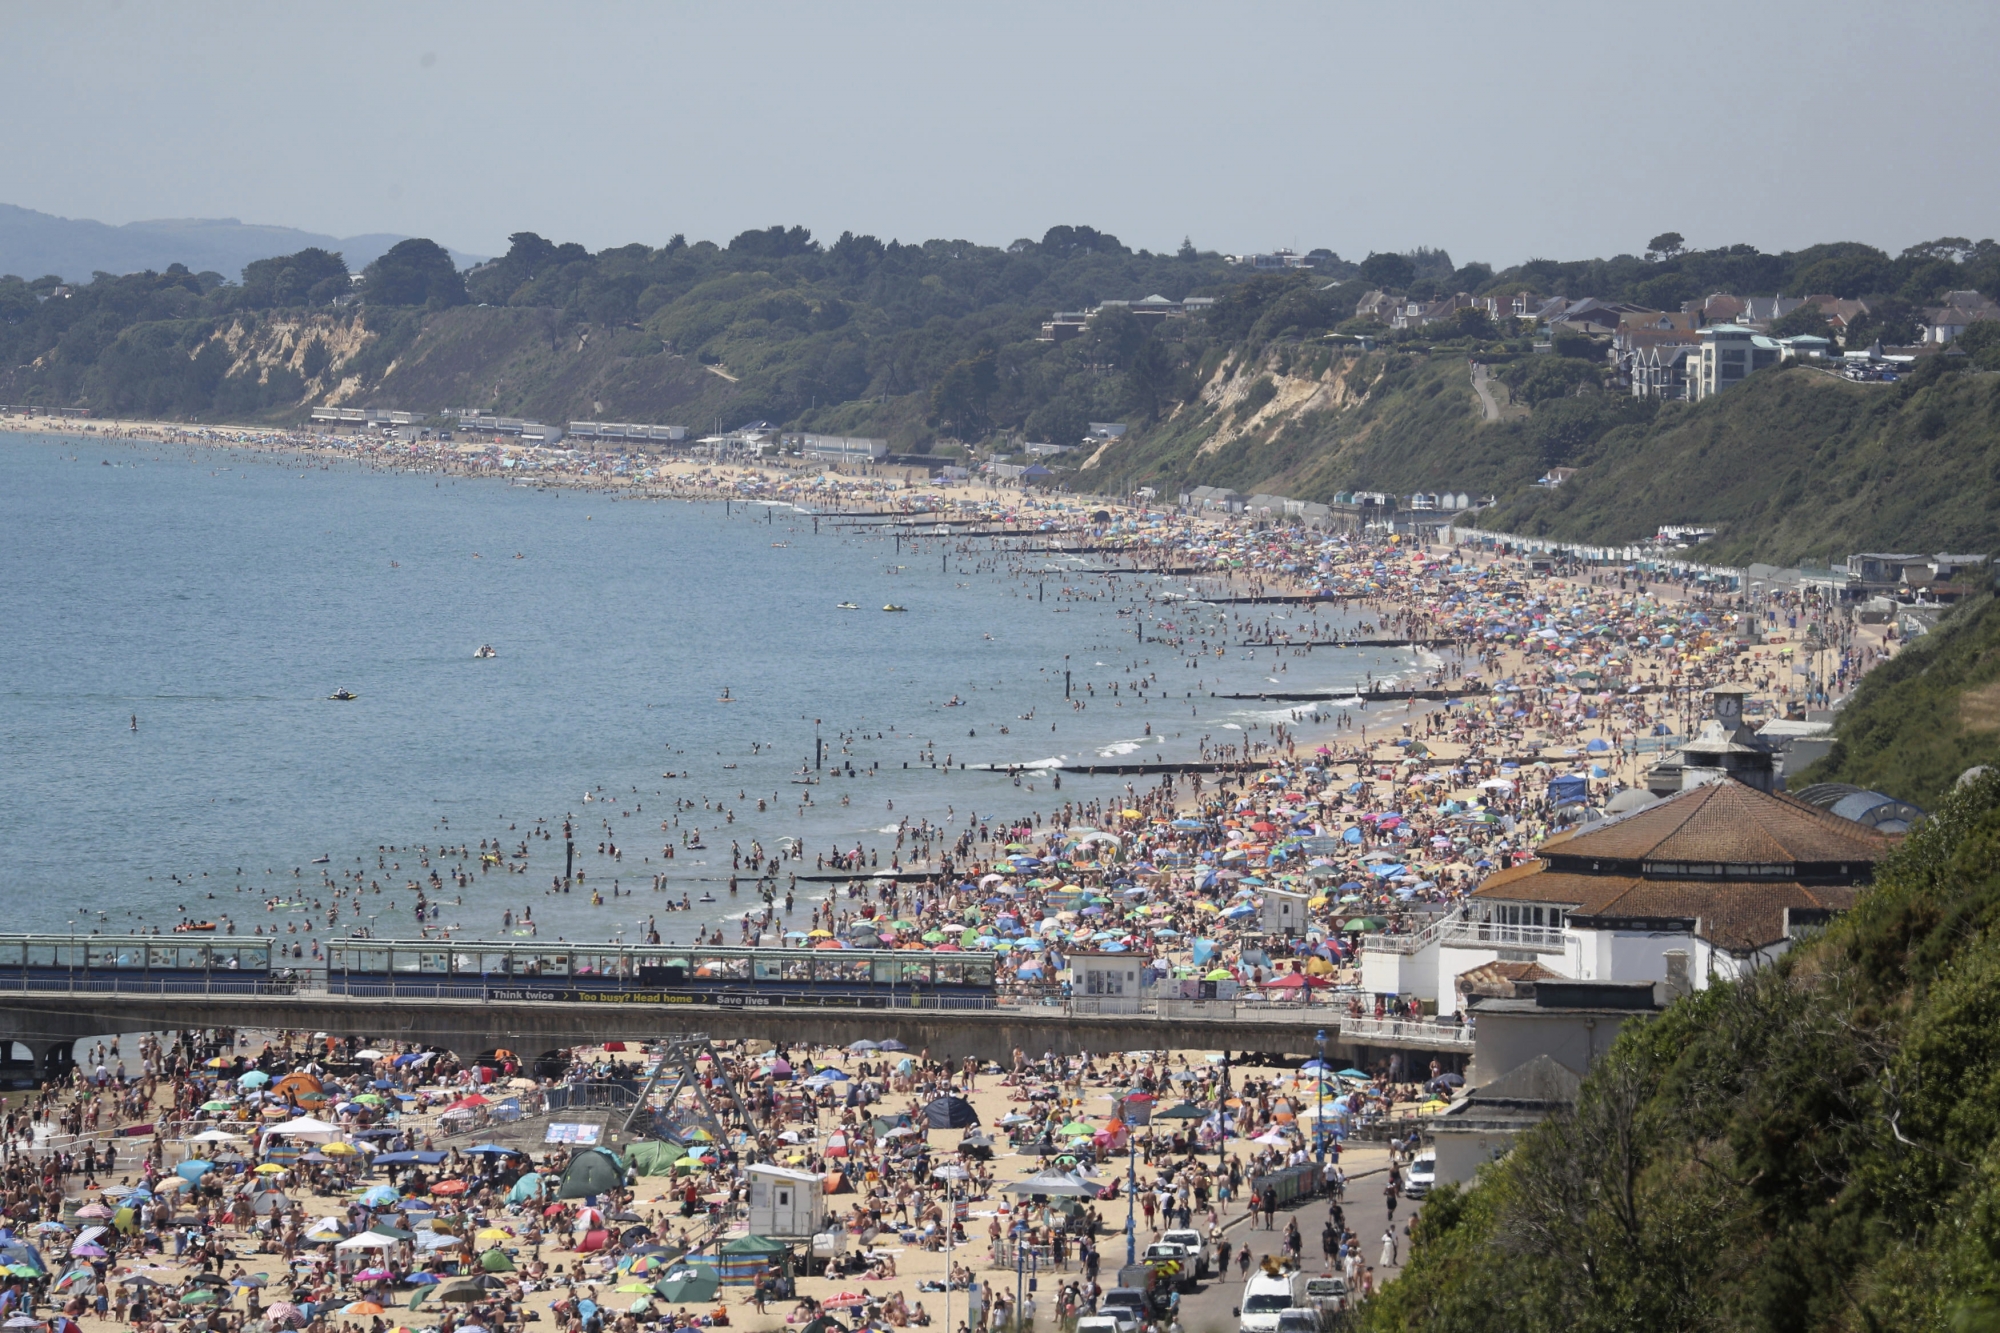 Crowds gather as hot weather draws crowds to the beach in Bournemouth, England, Thursday June 25, 2020. Coronavirus lockdown restrictions are being relaxed but people should still respect the distancing requirements between family groups. According to weather forecasters this could be the UK's hottest day of the year, so far, with scorching temperatures forecast to rise even further. (Andrew Matthews/PA via AP)
ArcInfo